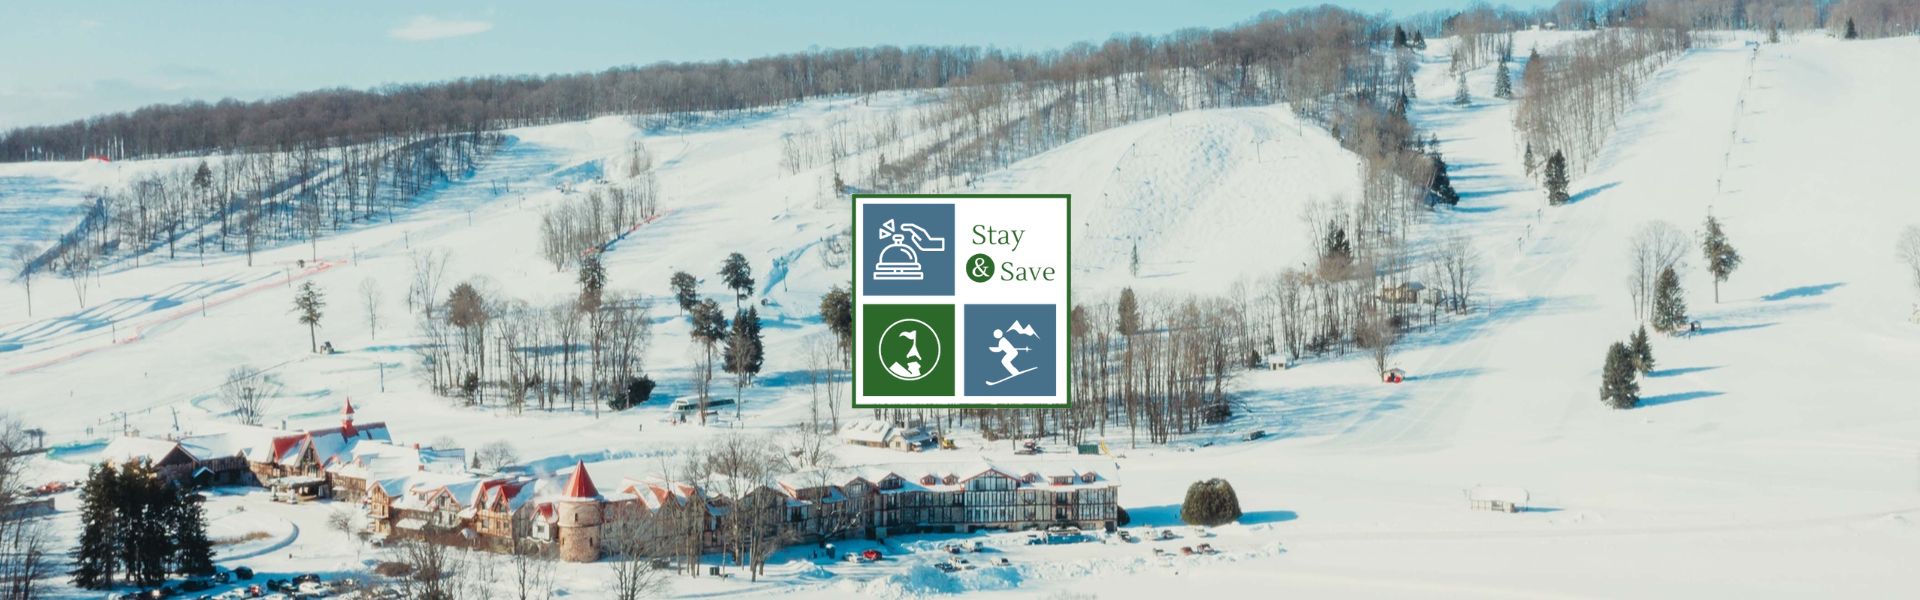 Stay and Save at The Highlands